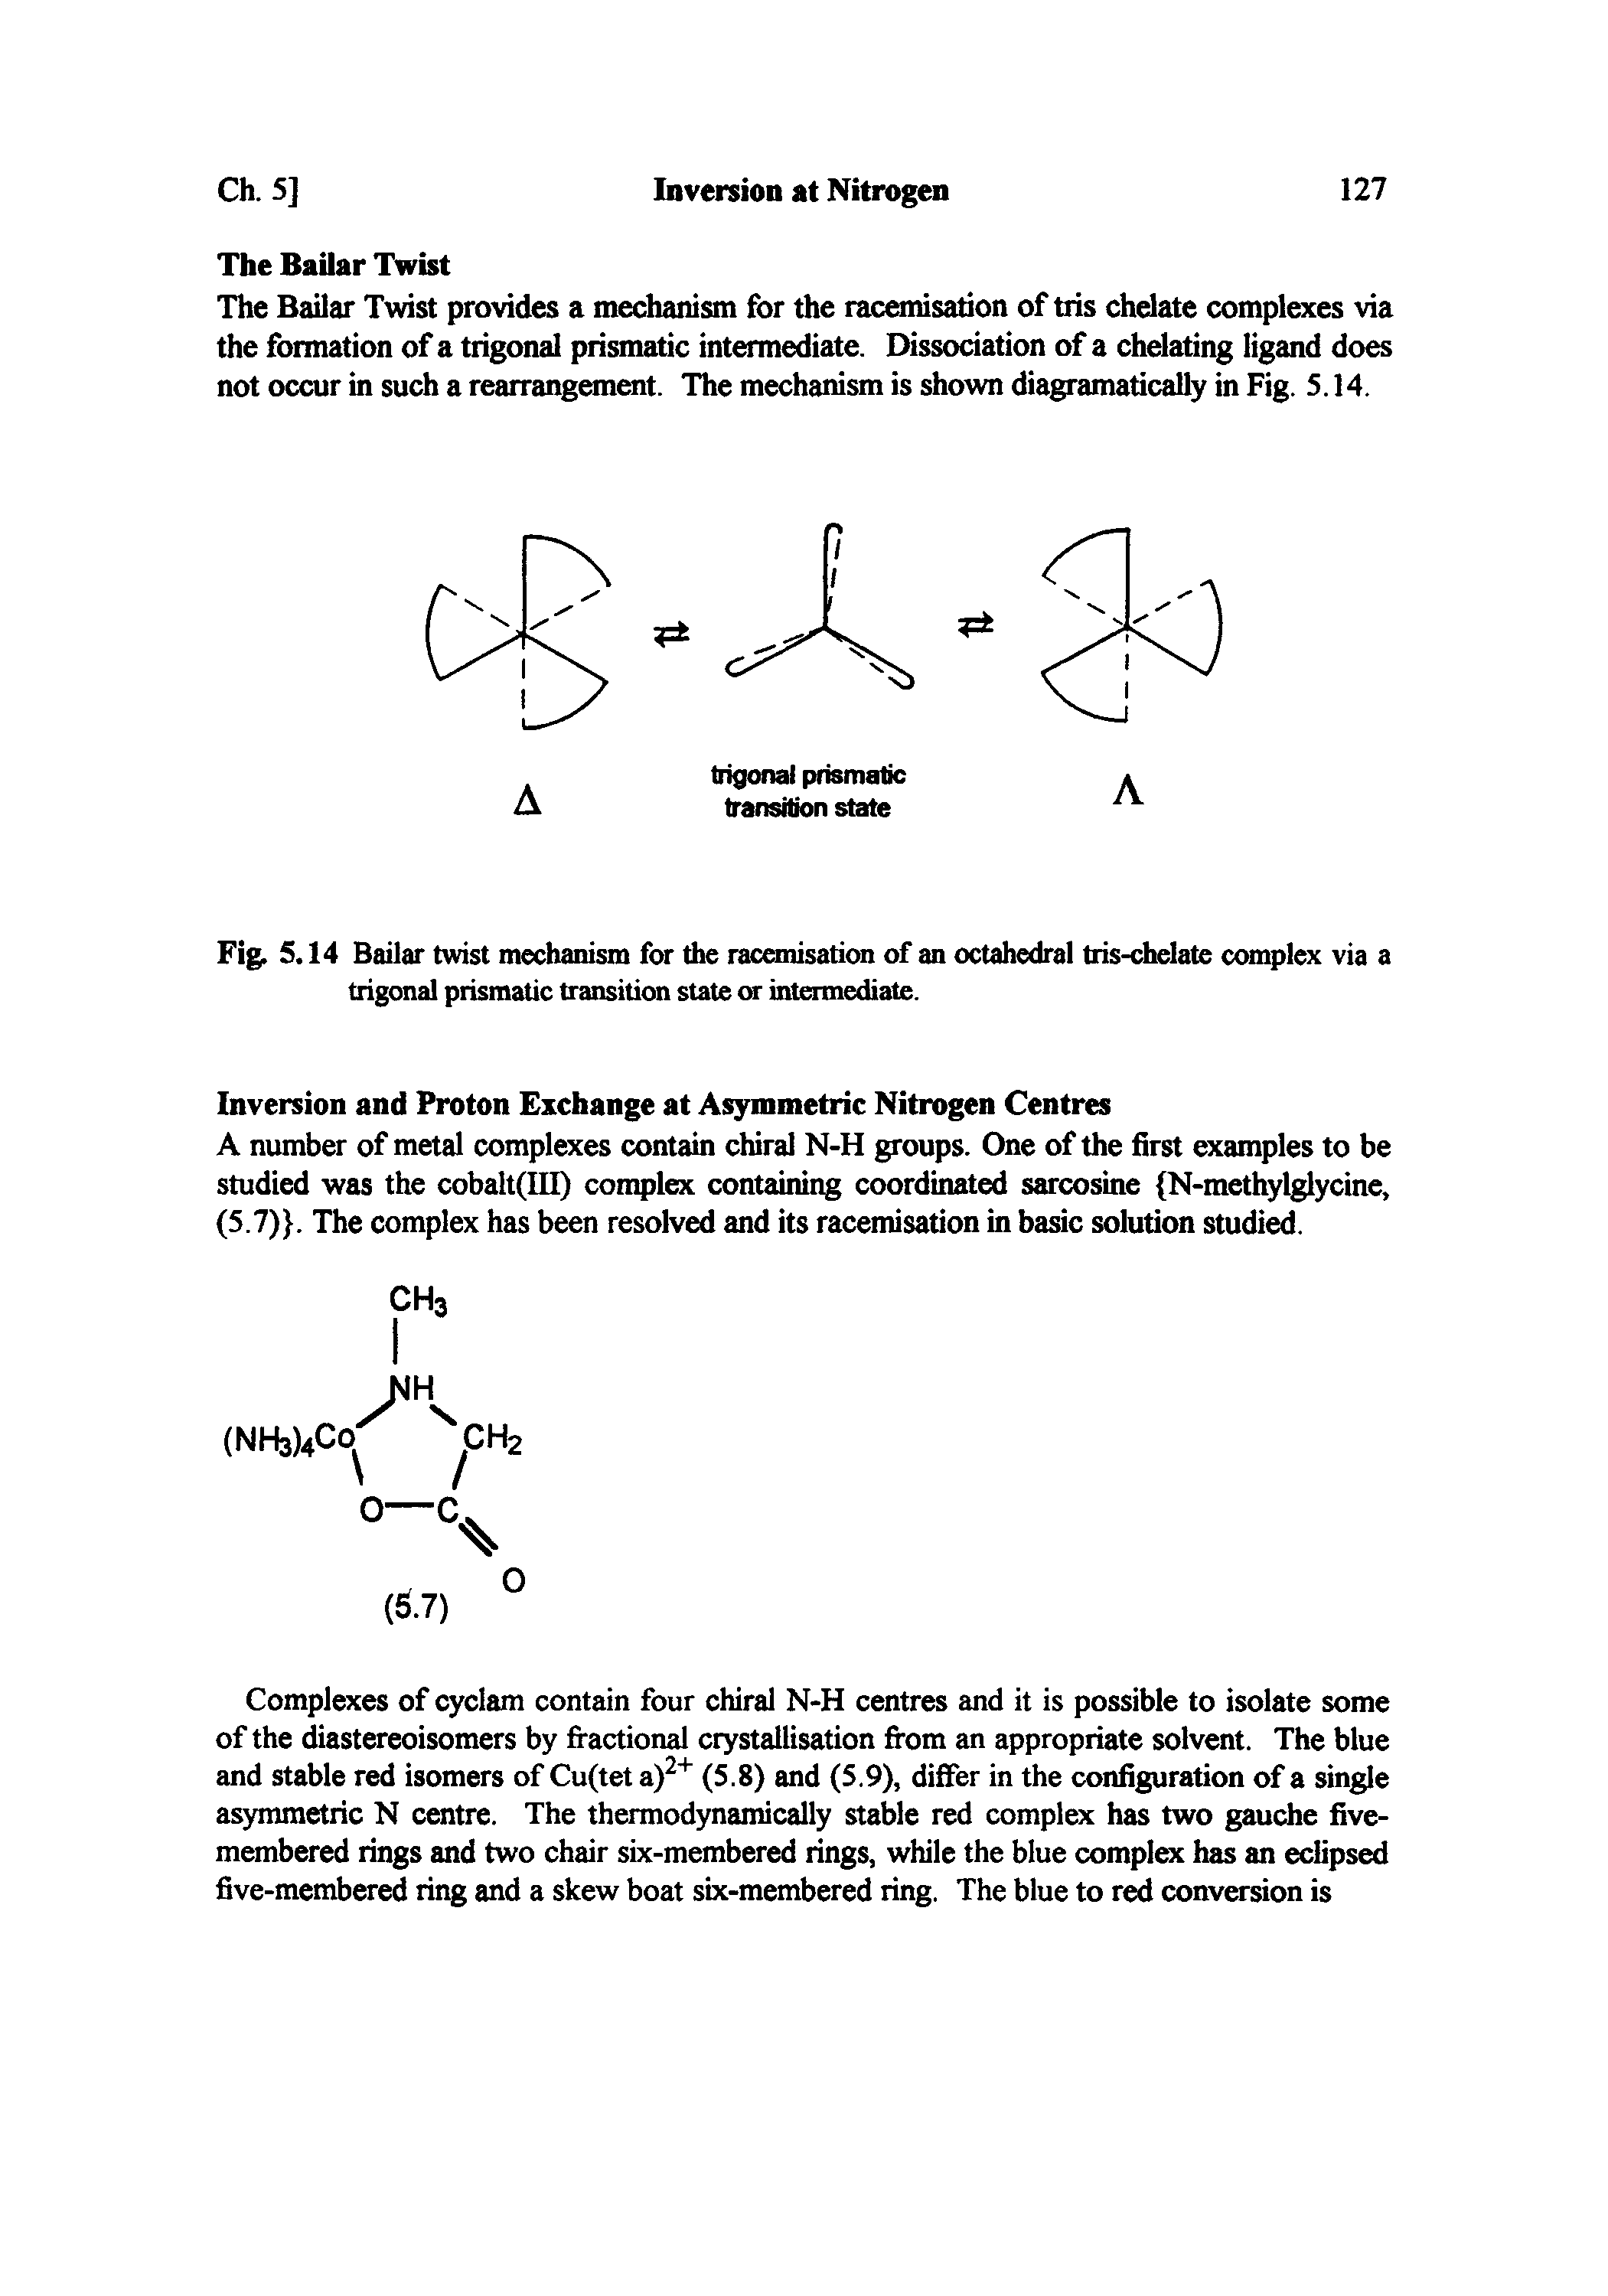 Fig. 5.14 Bailar twist mechanism for the racemisation of an octahedral tiis-chelate complex via a trigonal prismatic transition state or intermediate.